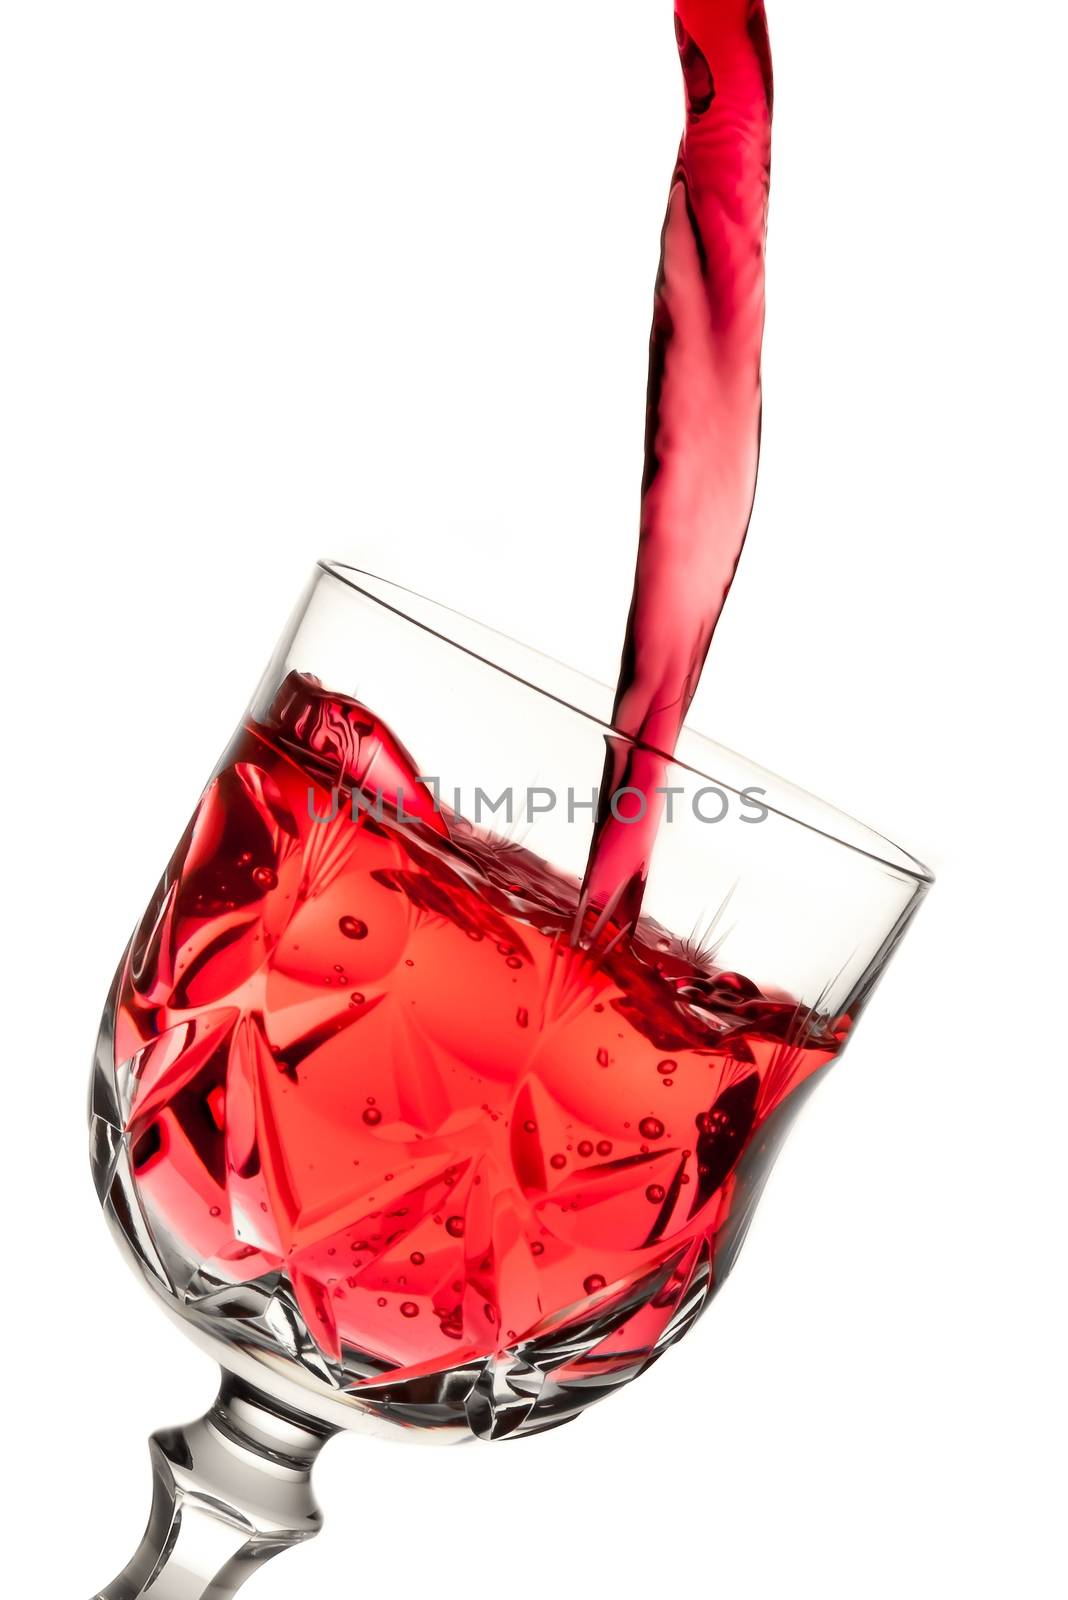 red wine pouring into glass by donfiore